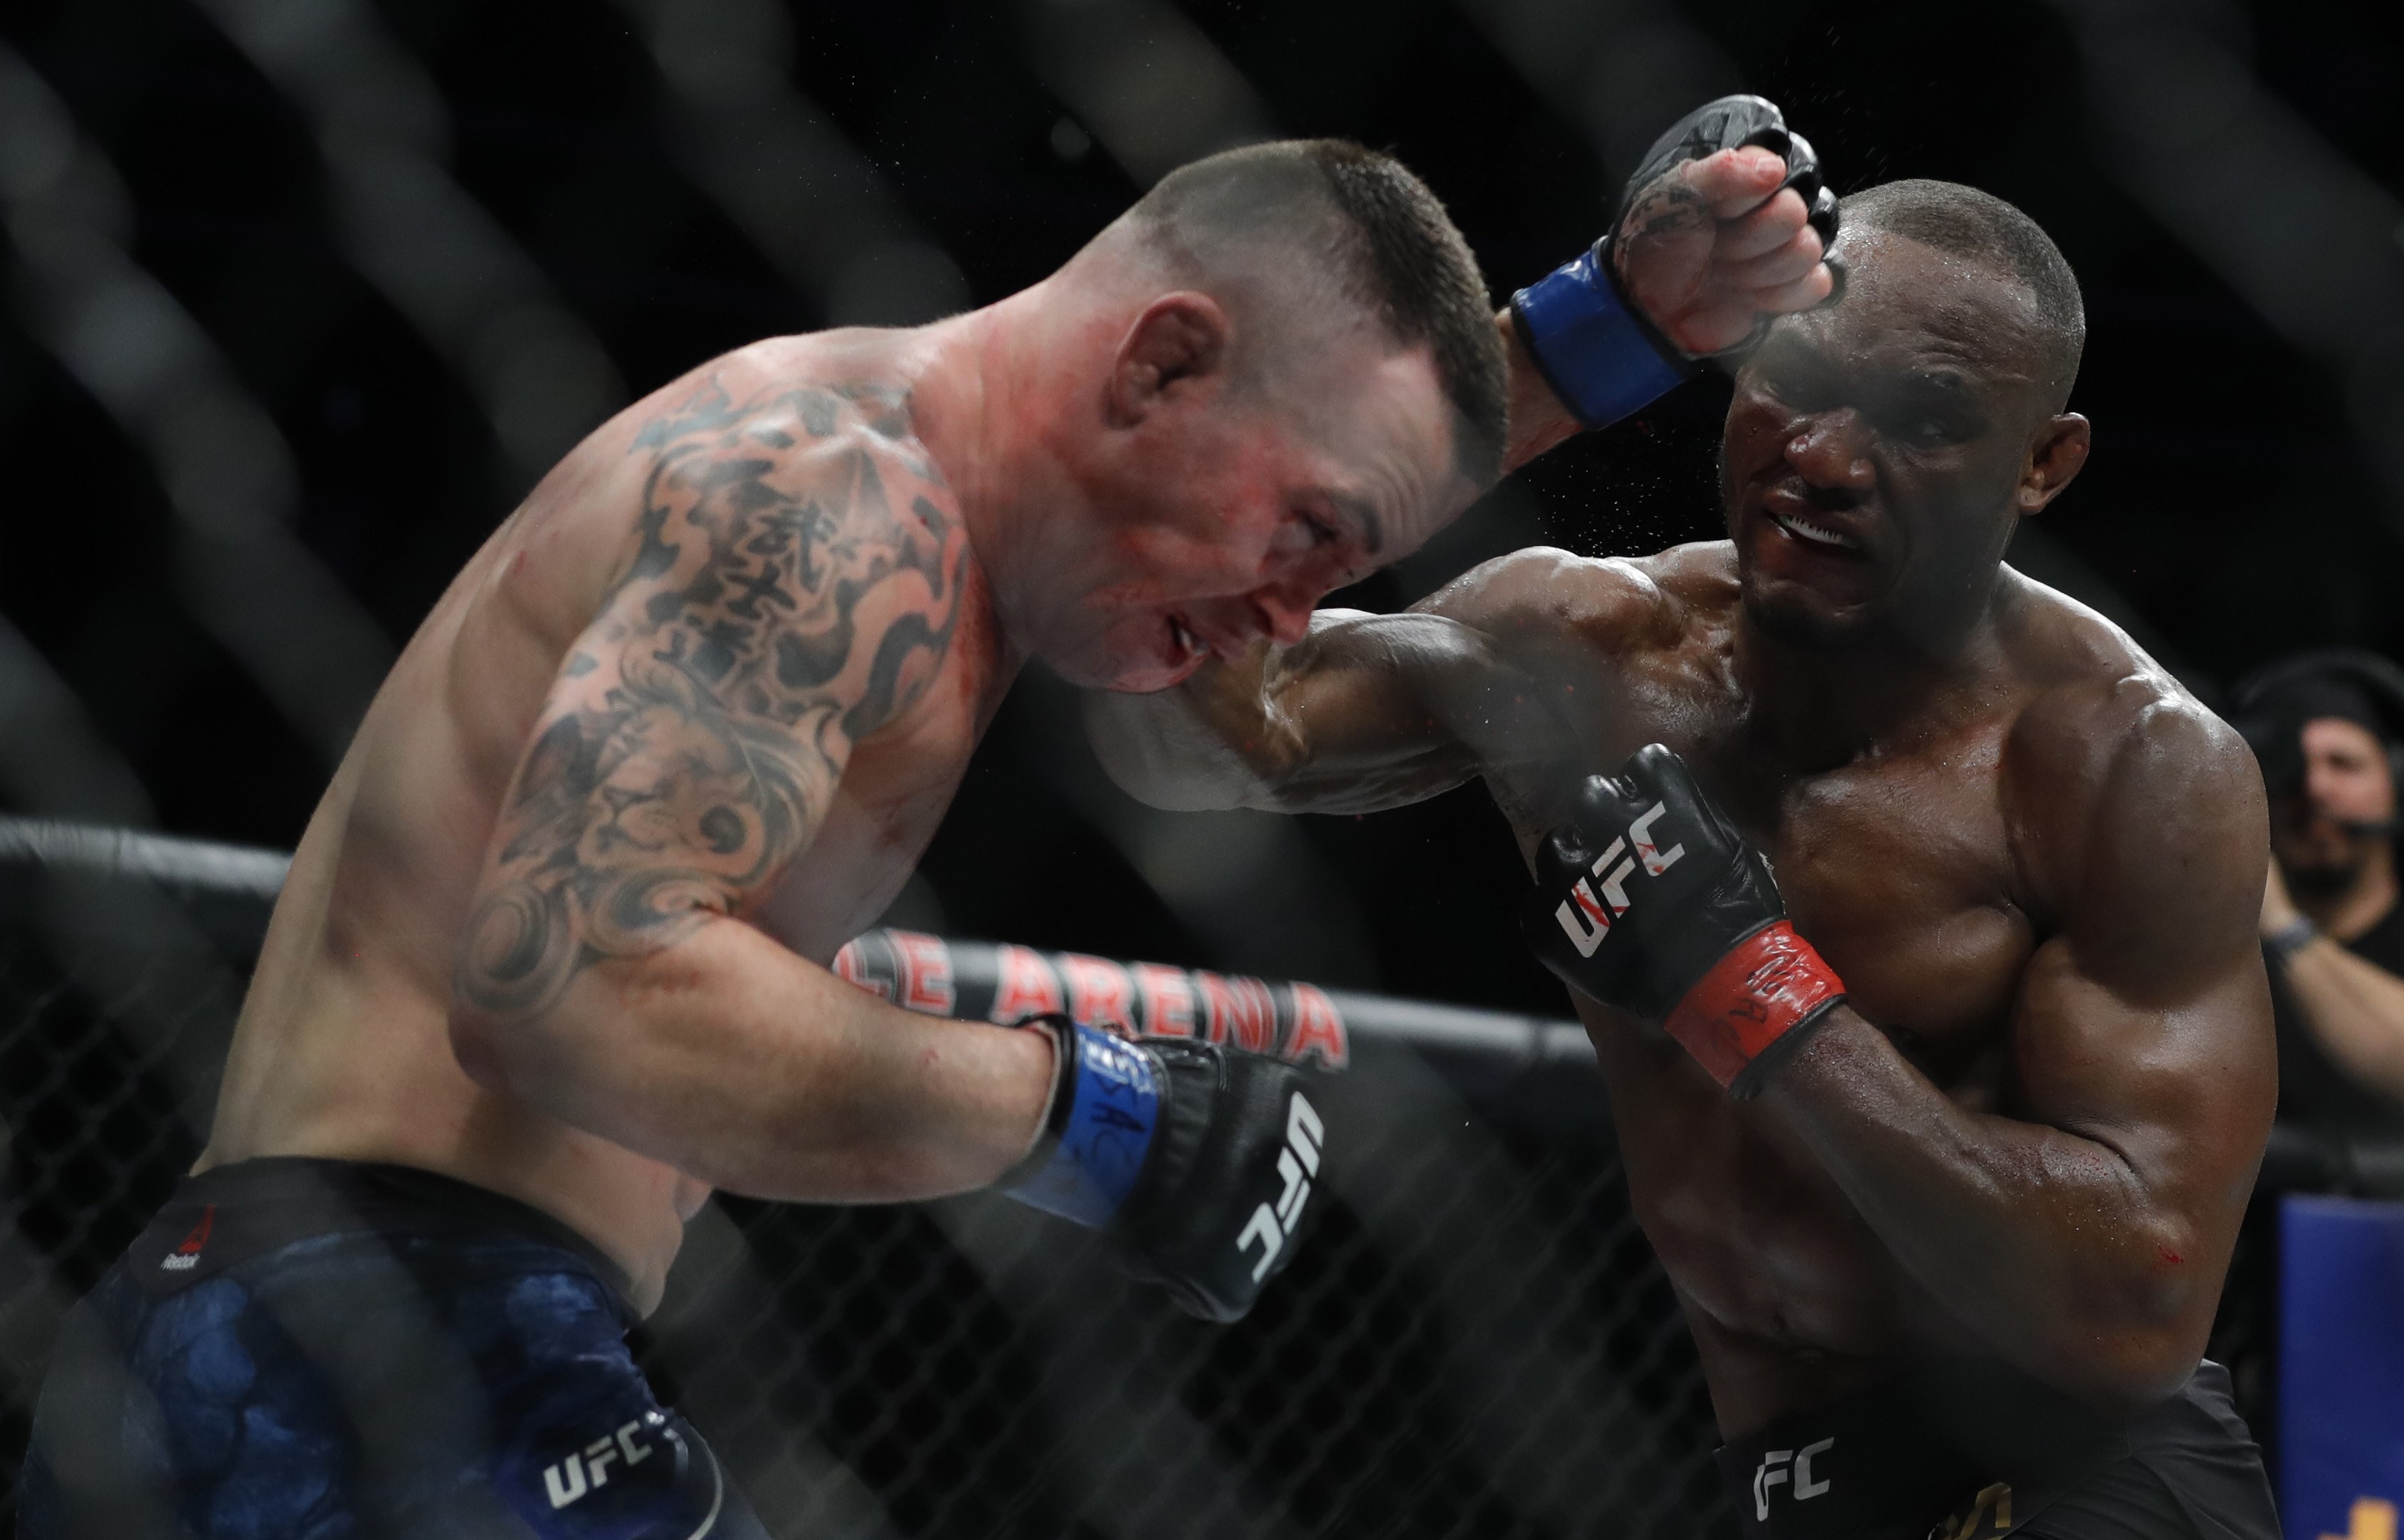 Colby Covington (left) gets hit with a punch from UFC welterweight champion Kamaru Usman at UFC 245. Photo: AFP